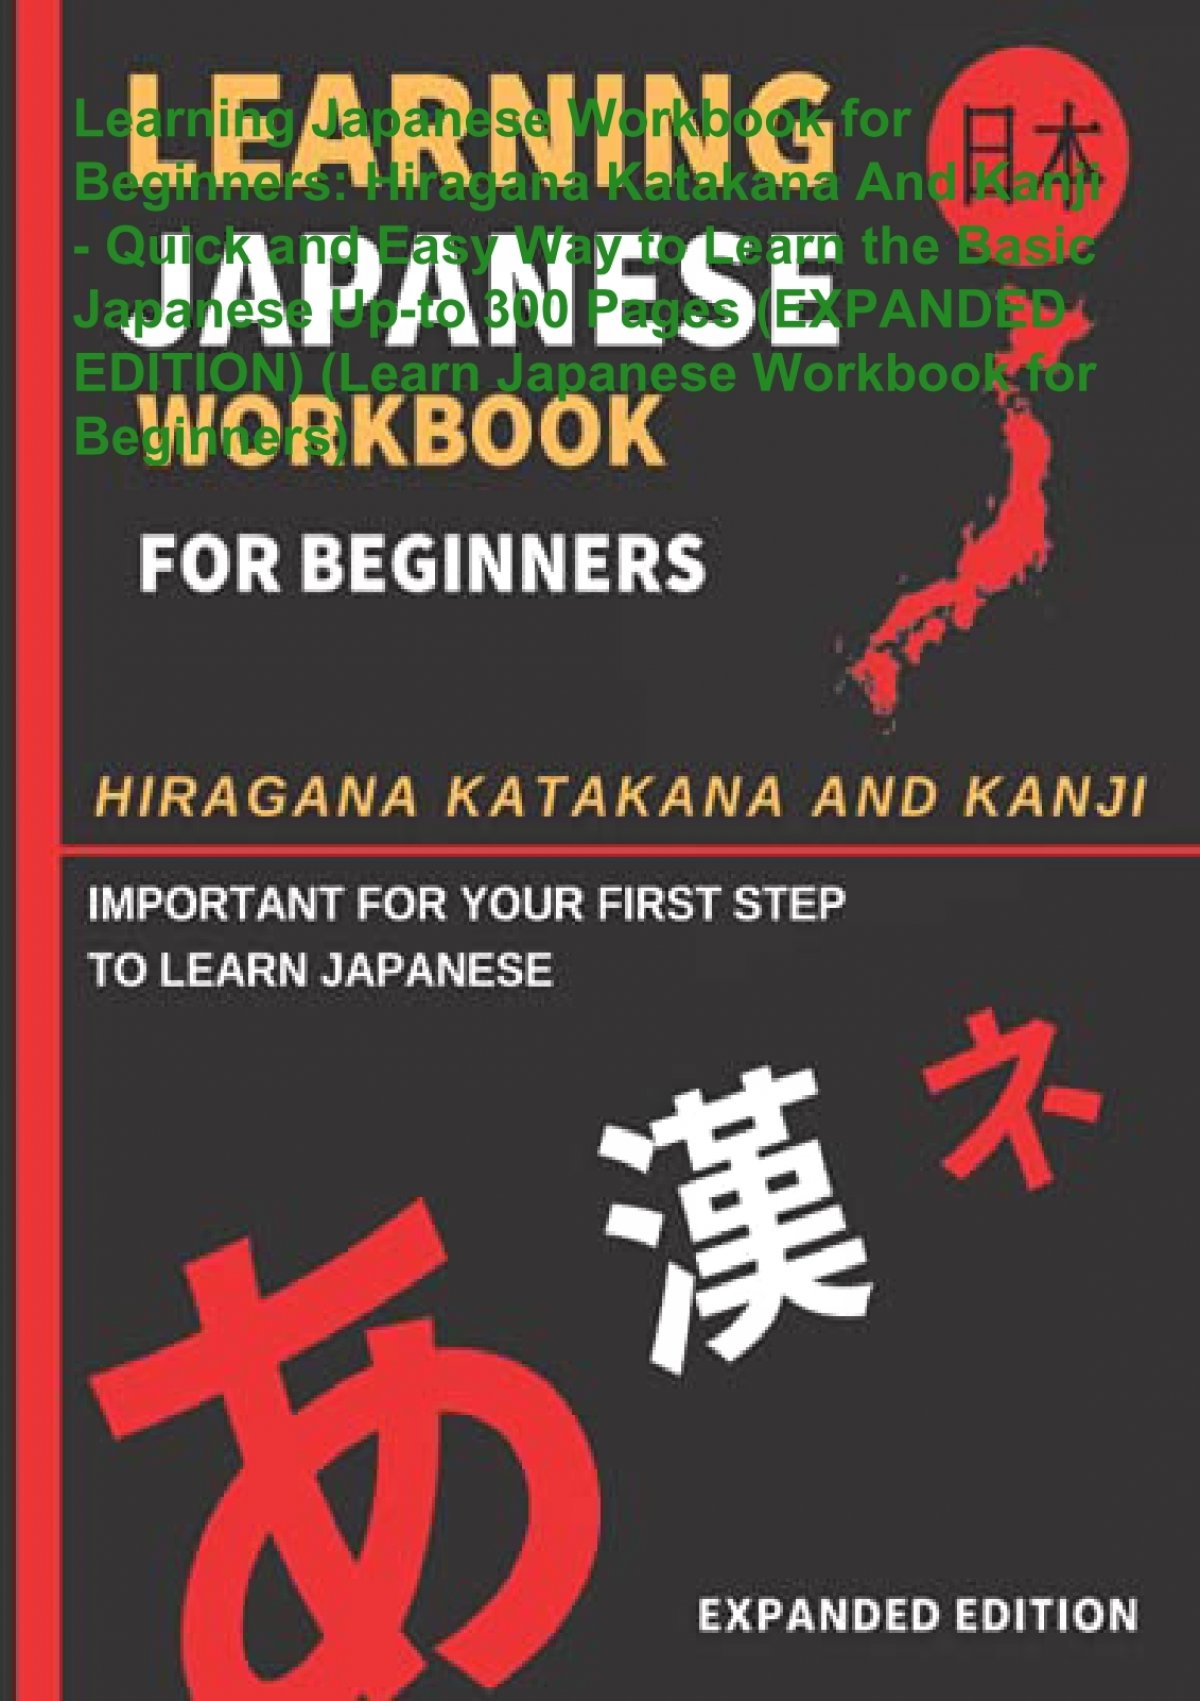 book-read-learning-japanese-workbook-for-beginners-hiragana